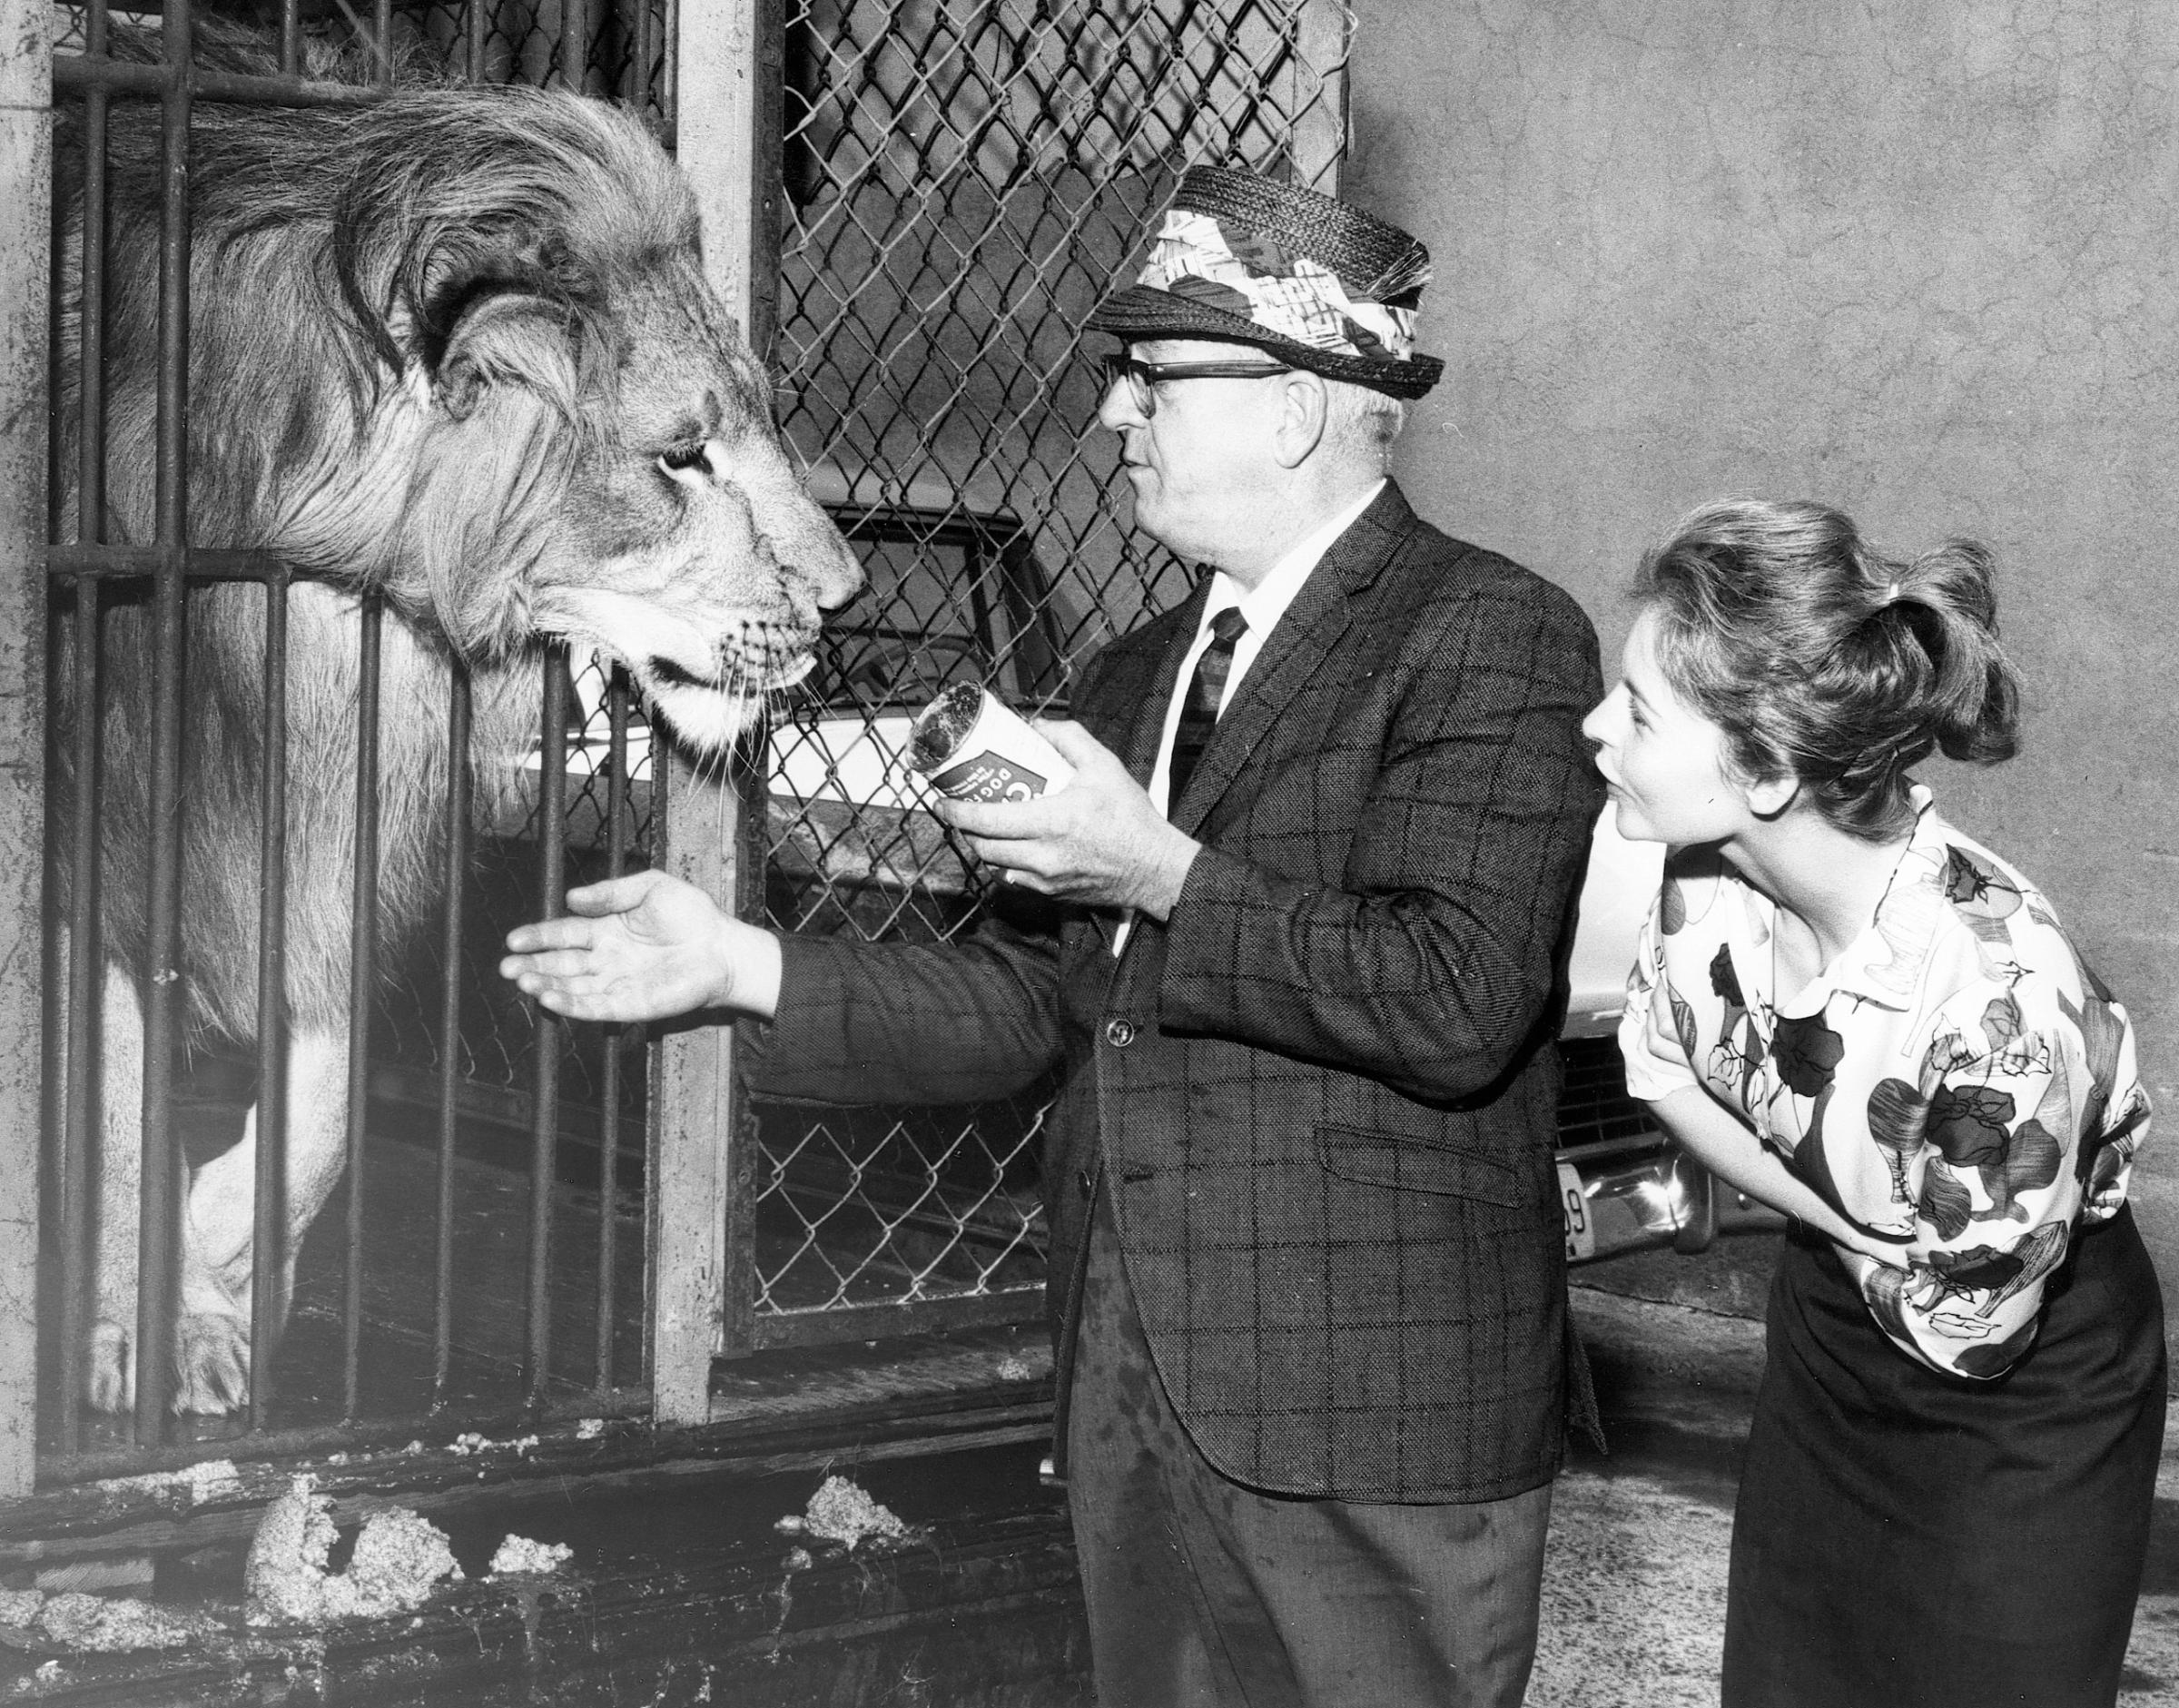 Circus lion gets a visit at the ASPCA Animal Port at Idlewild (John F. Kennedy) Airport, 1960s